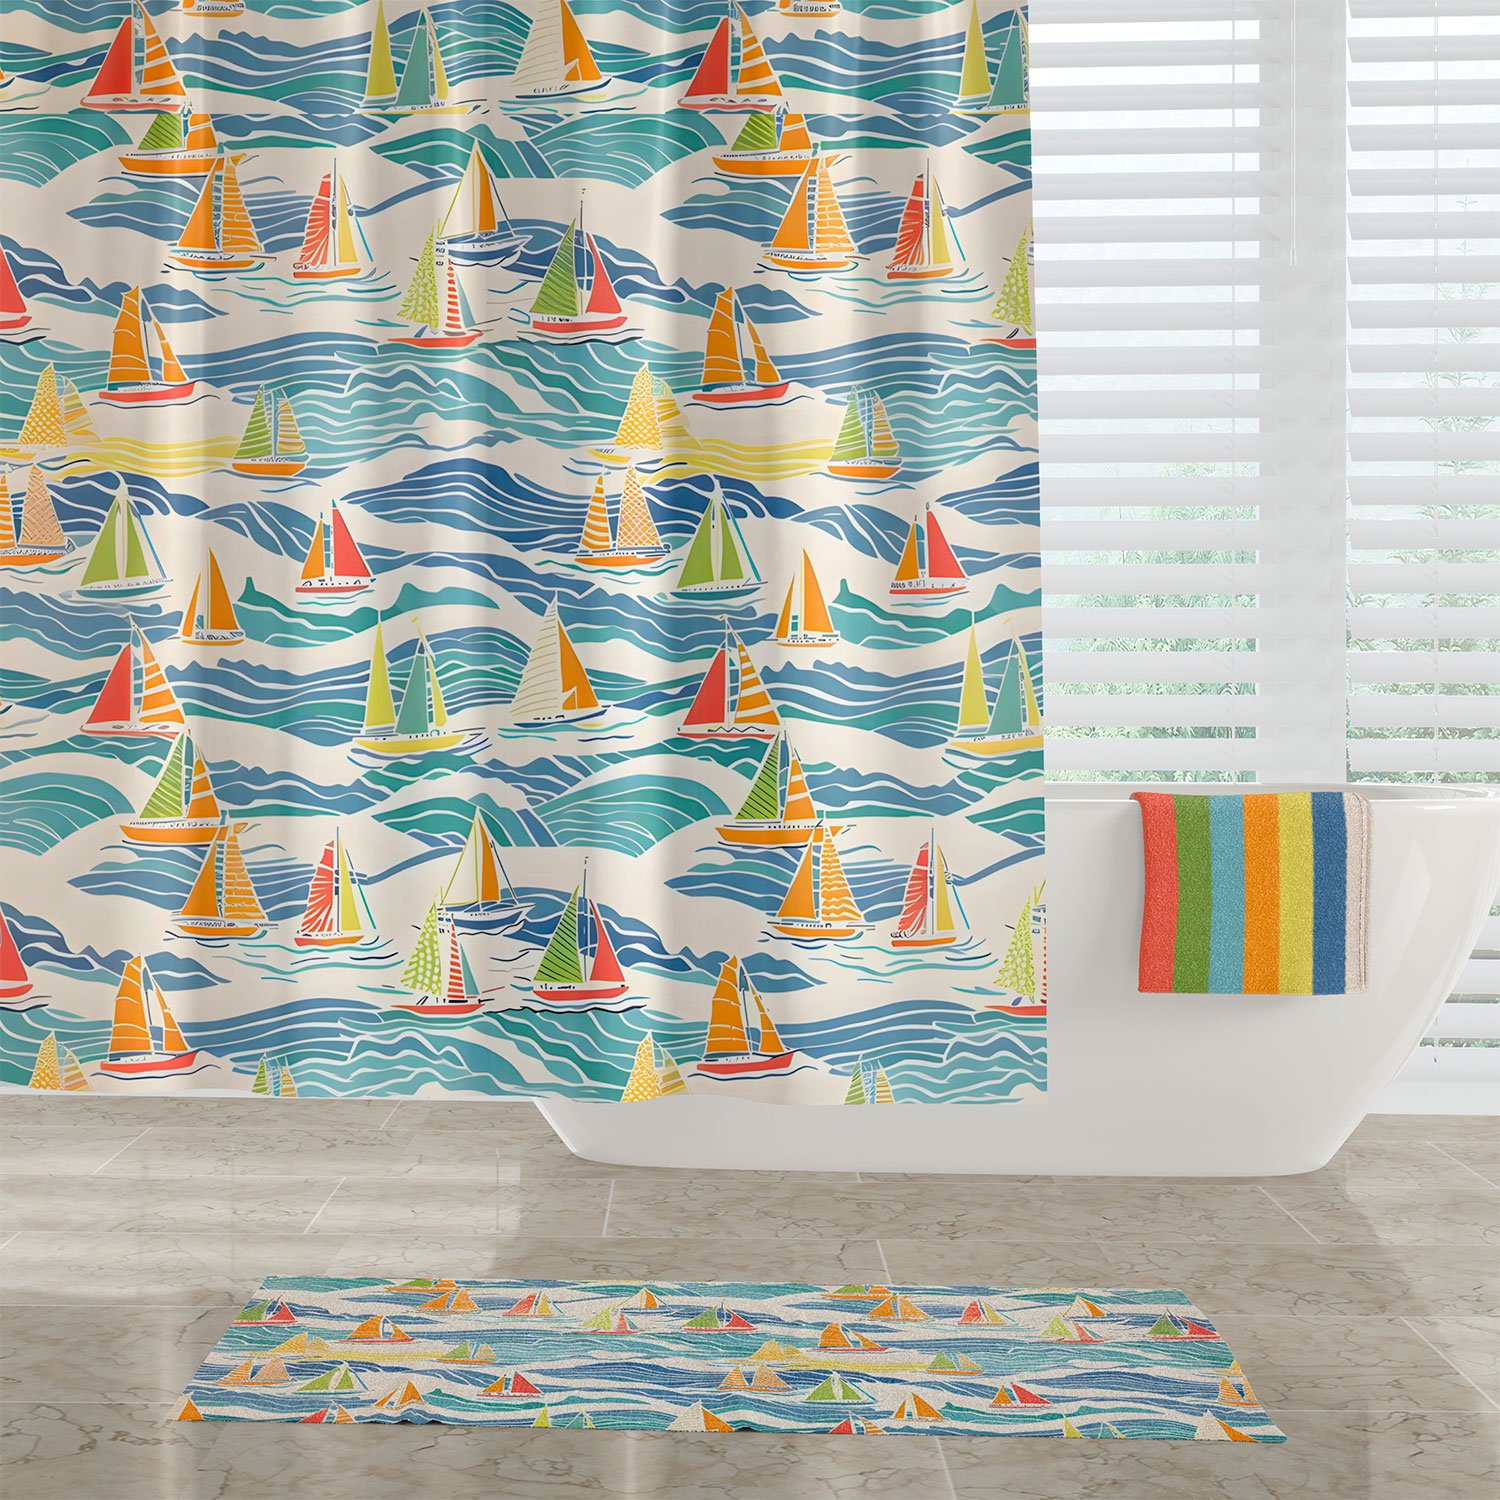 elegant beach theme shower curtain with blue yellow green and orange sailboats by Ozscape Designs hanging in bathroom